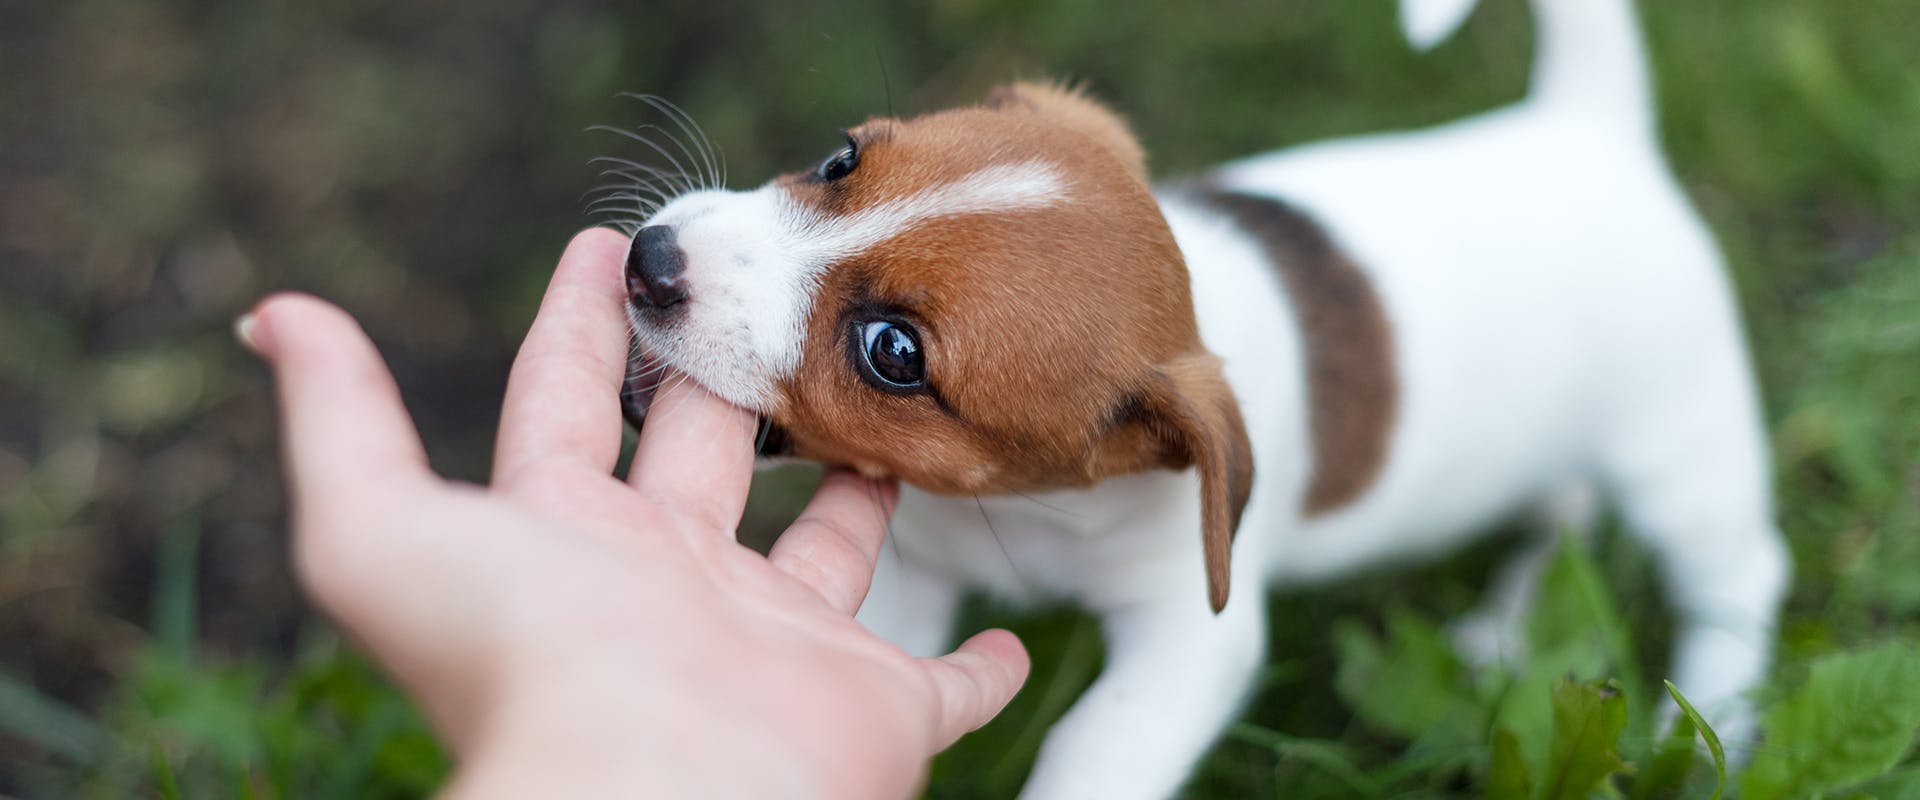 When is a dog not a puppy anymore? A cute puppy playfully biting a person's hand, which is coming down from above